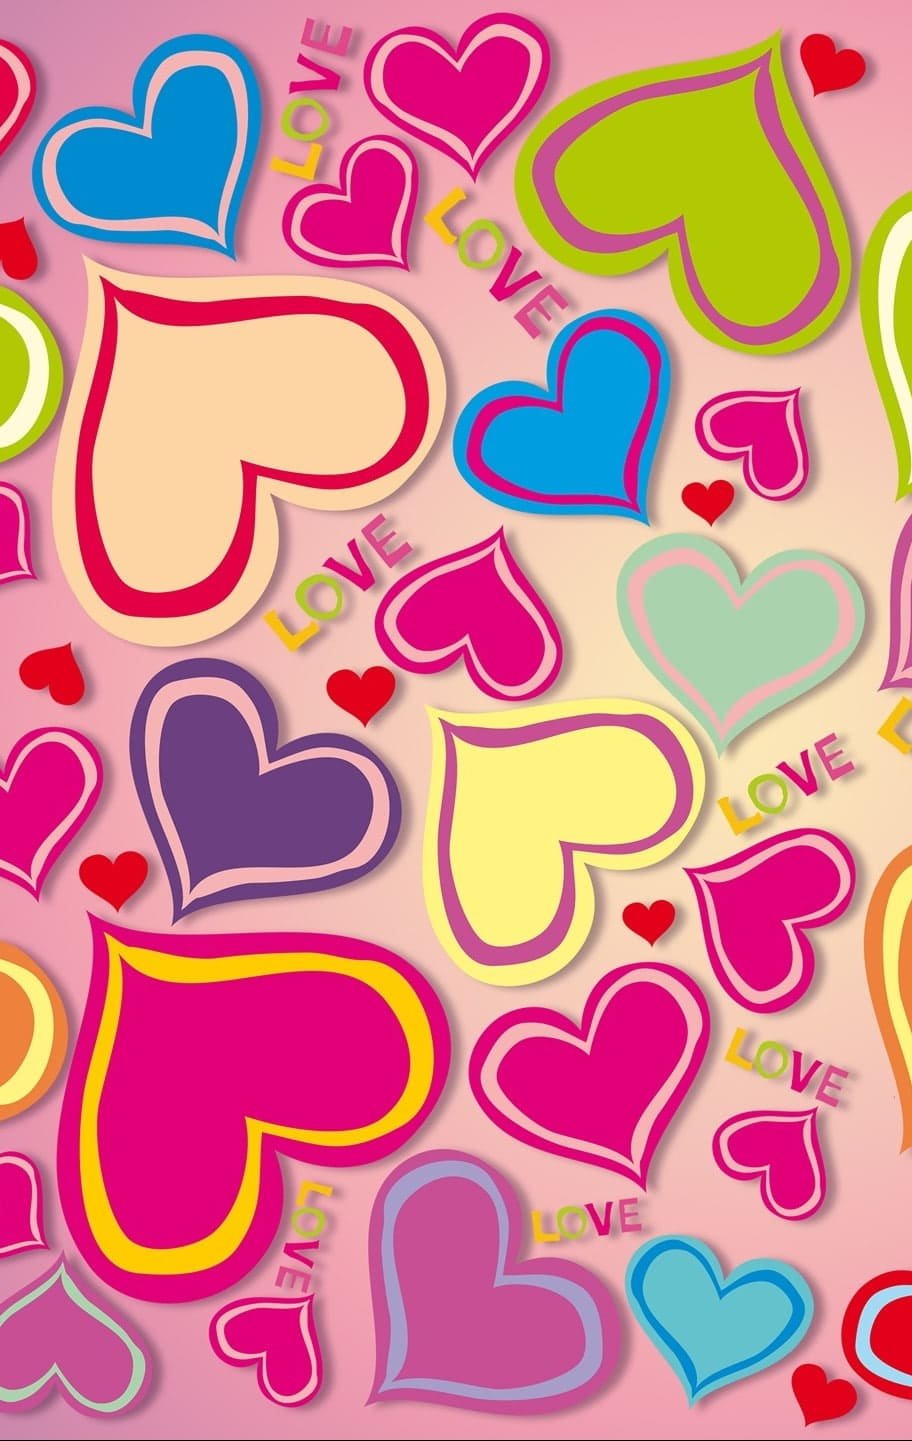 HD wallpaper Colorful hearts love valentines day wallpaper iphone